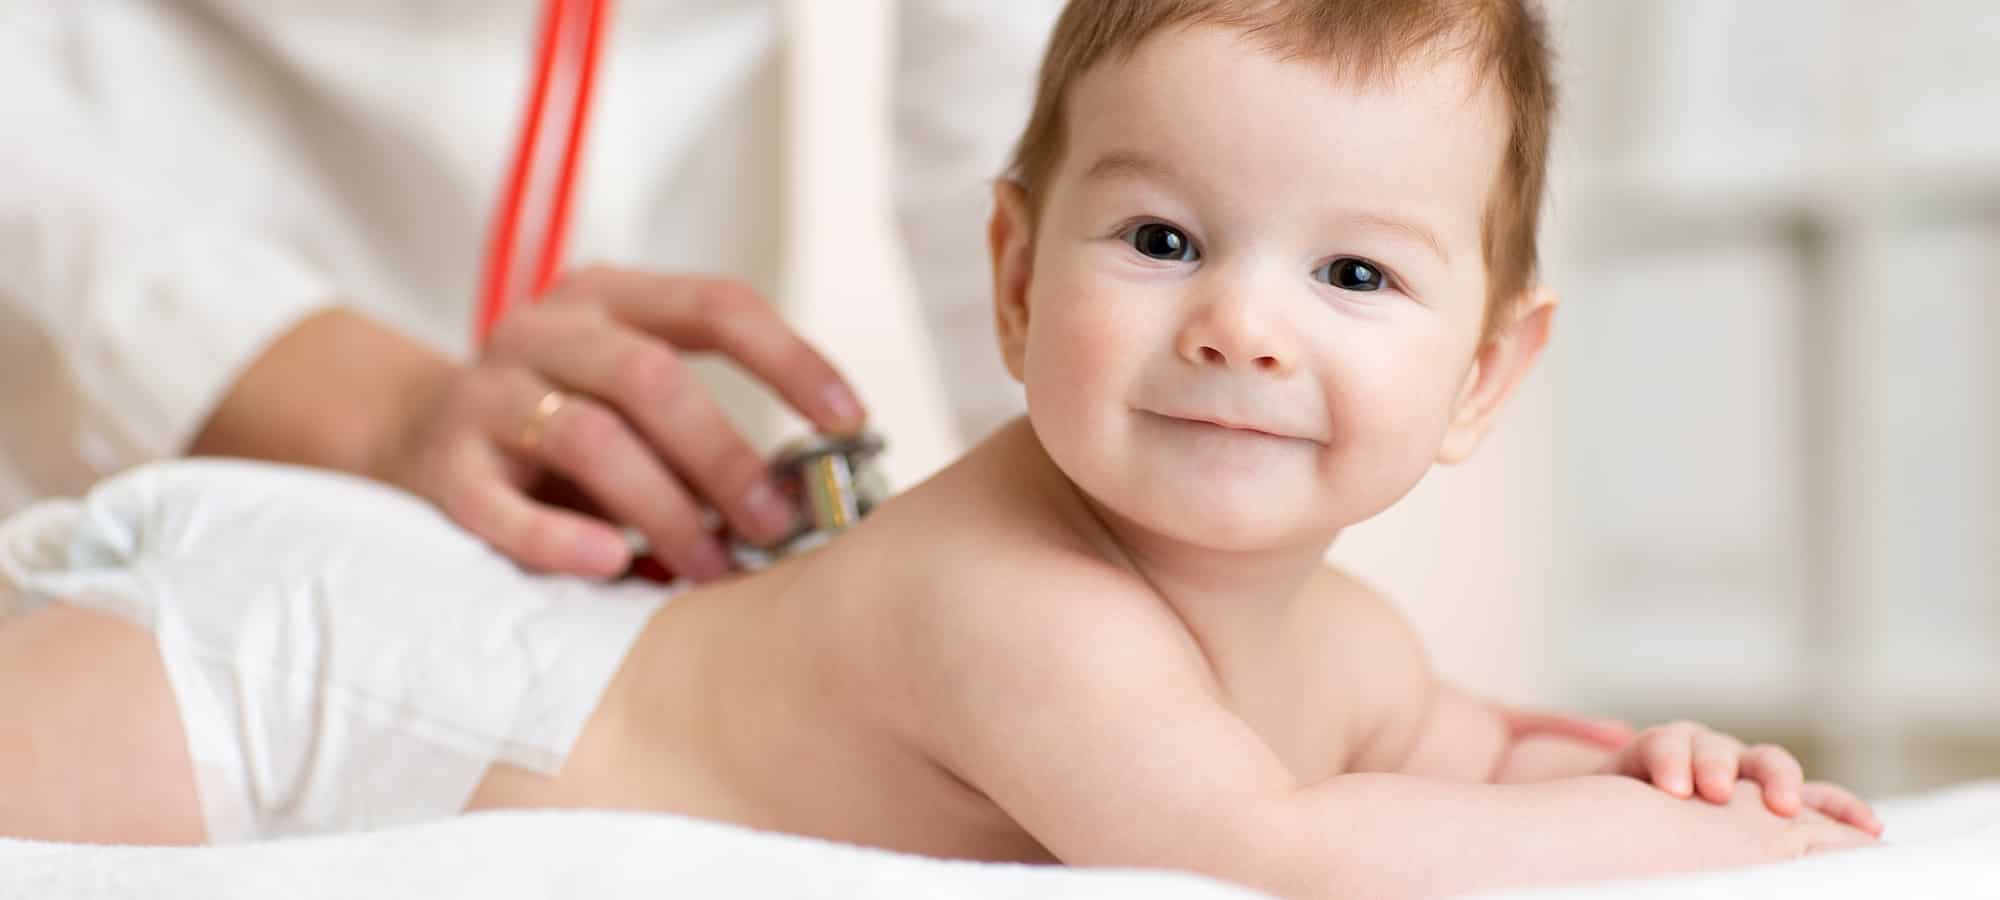 10 Things to know before your Paediatrician Appointment